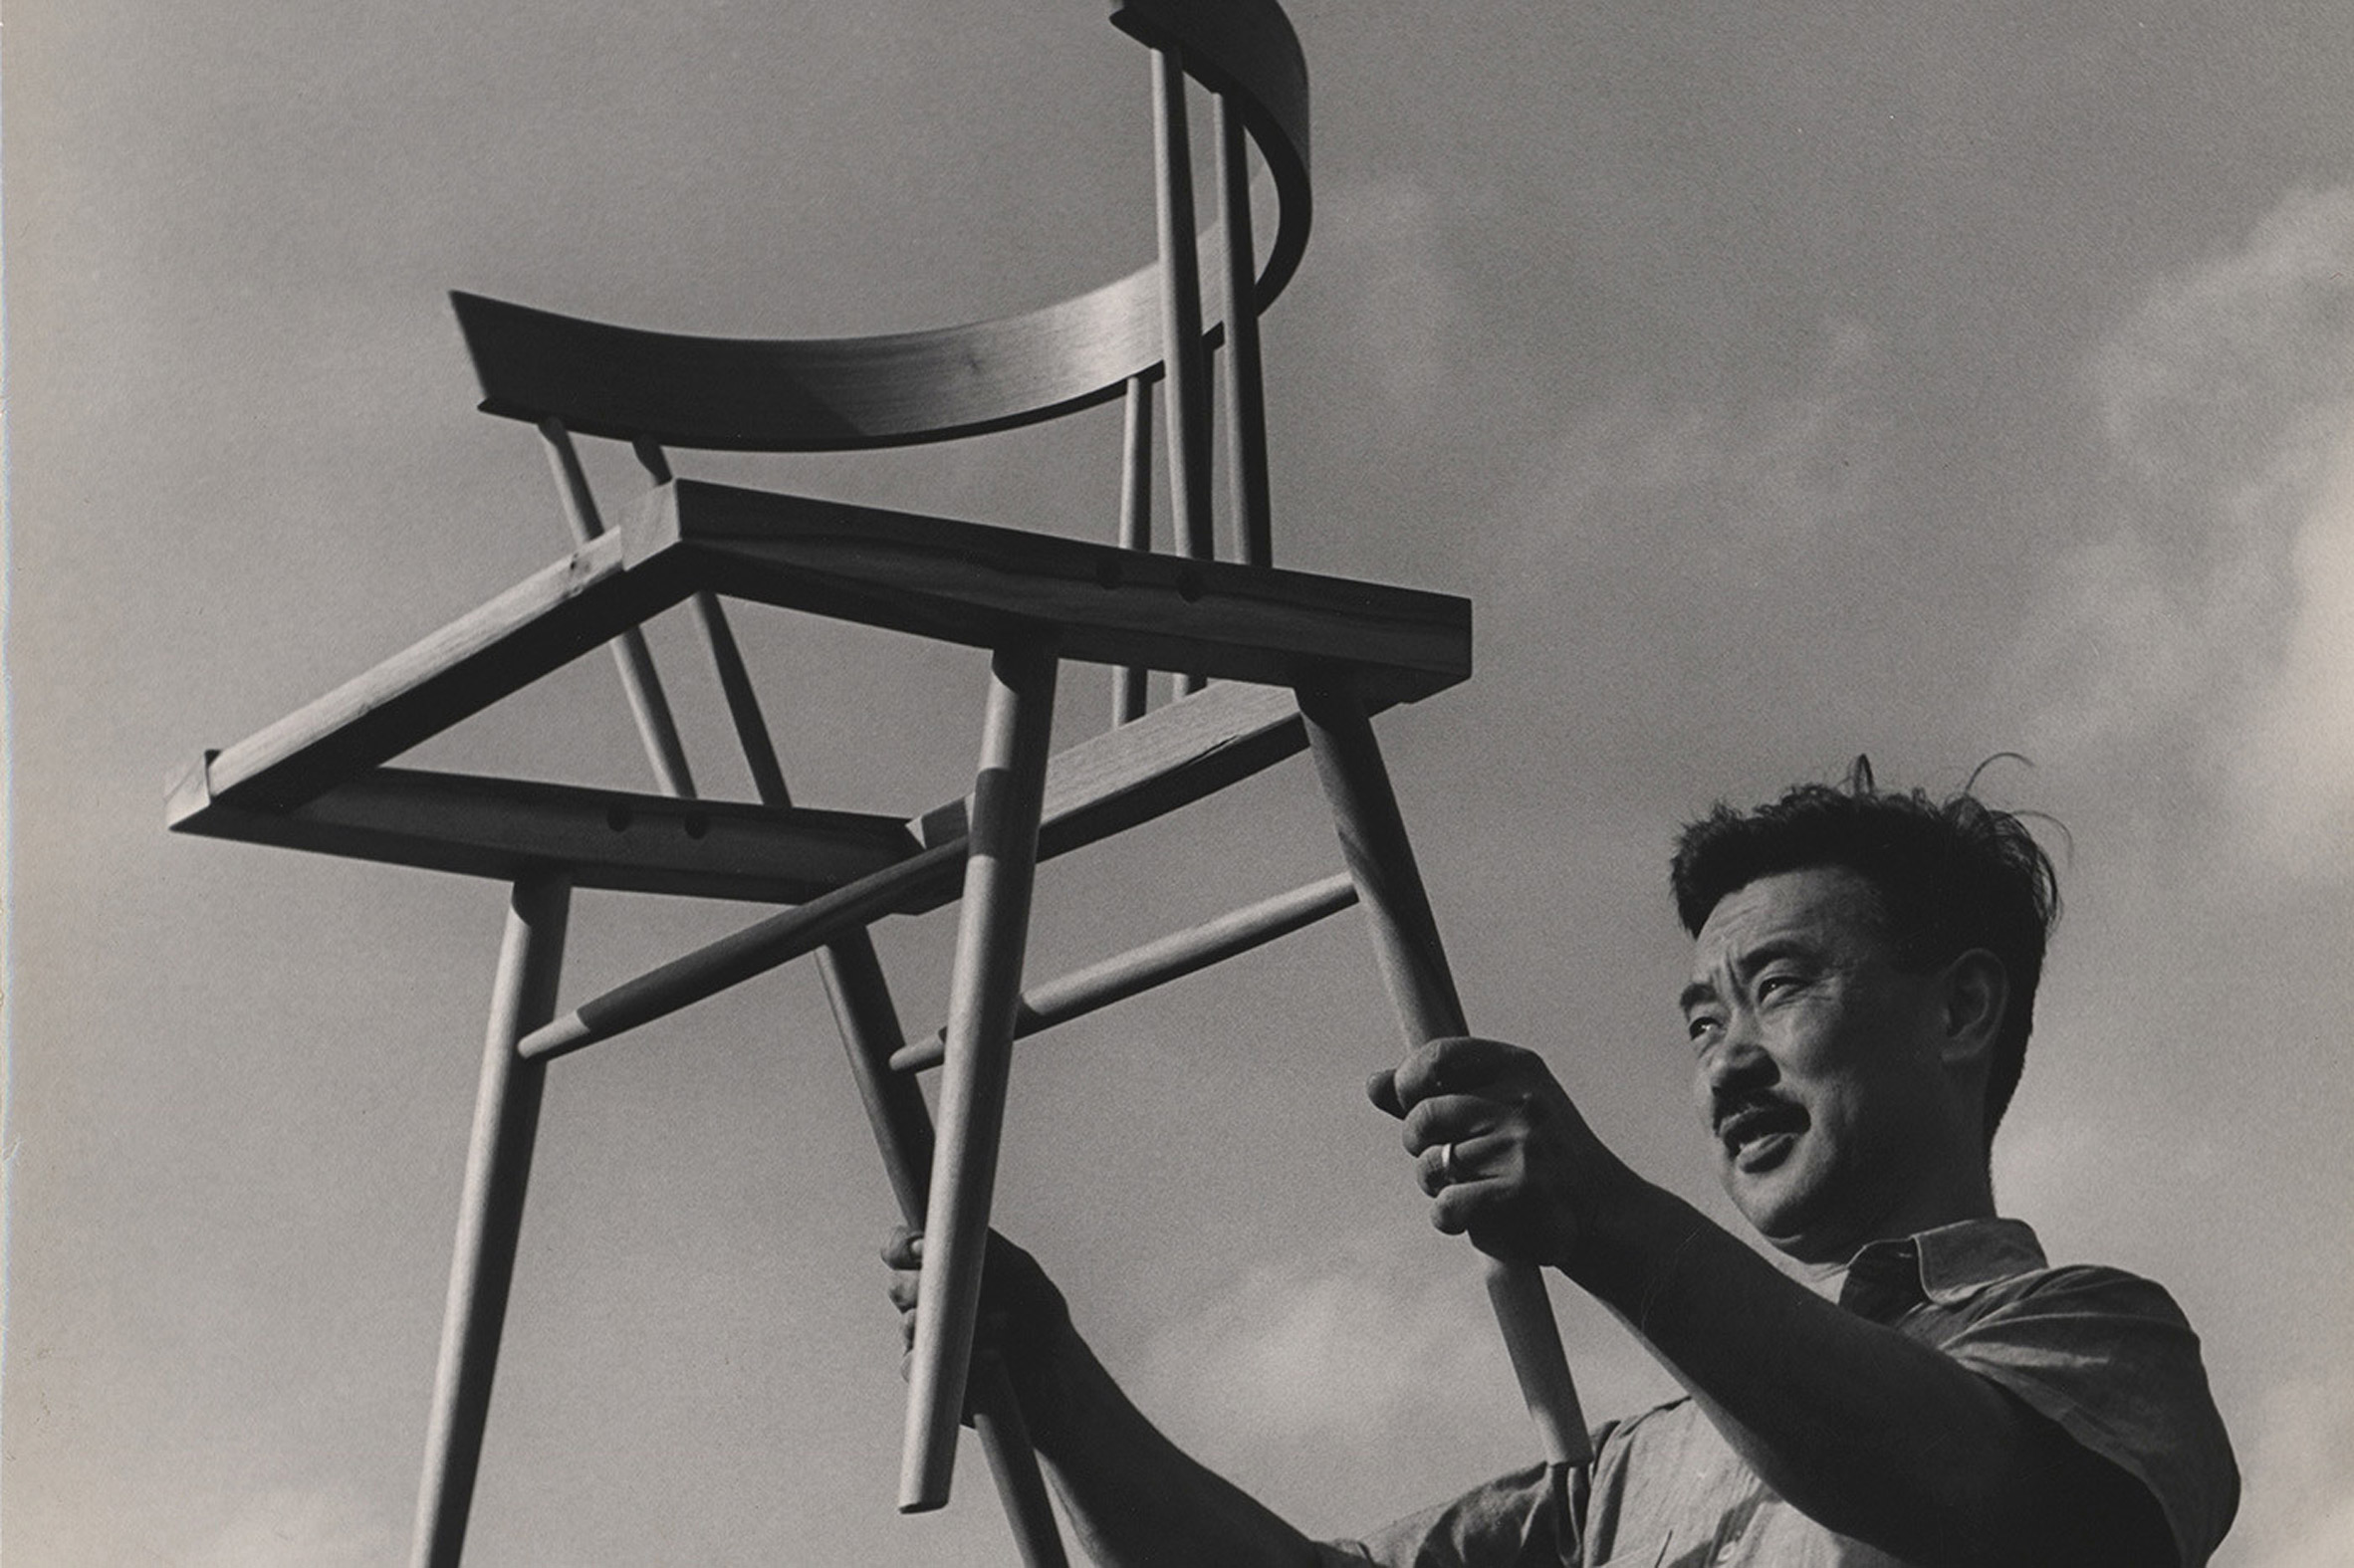 Masters of Modern Design: The Art of the Japanese American Experience, directed by Akira Boch